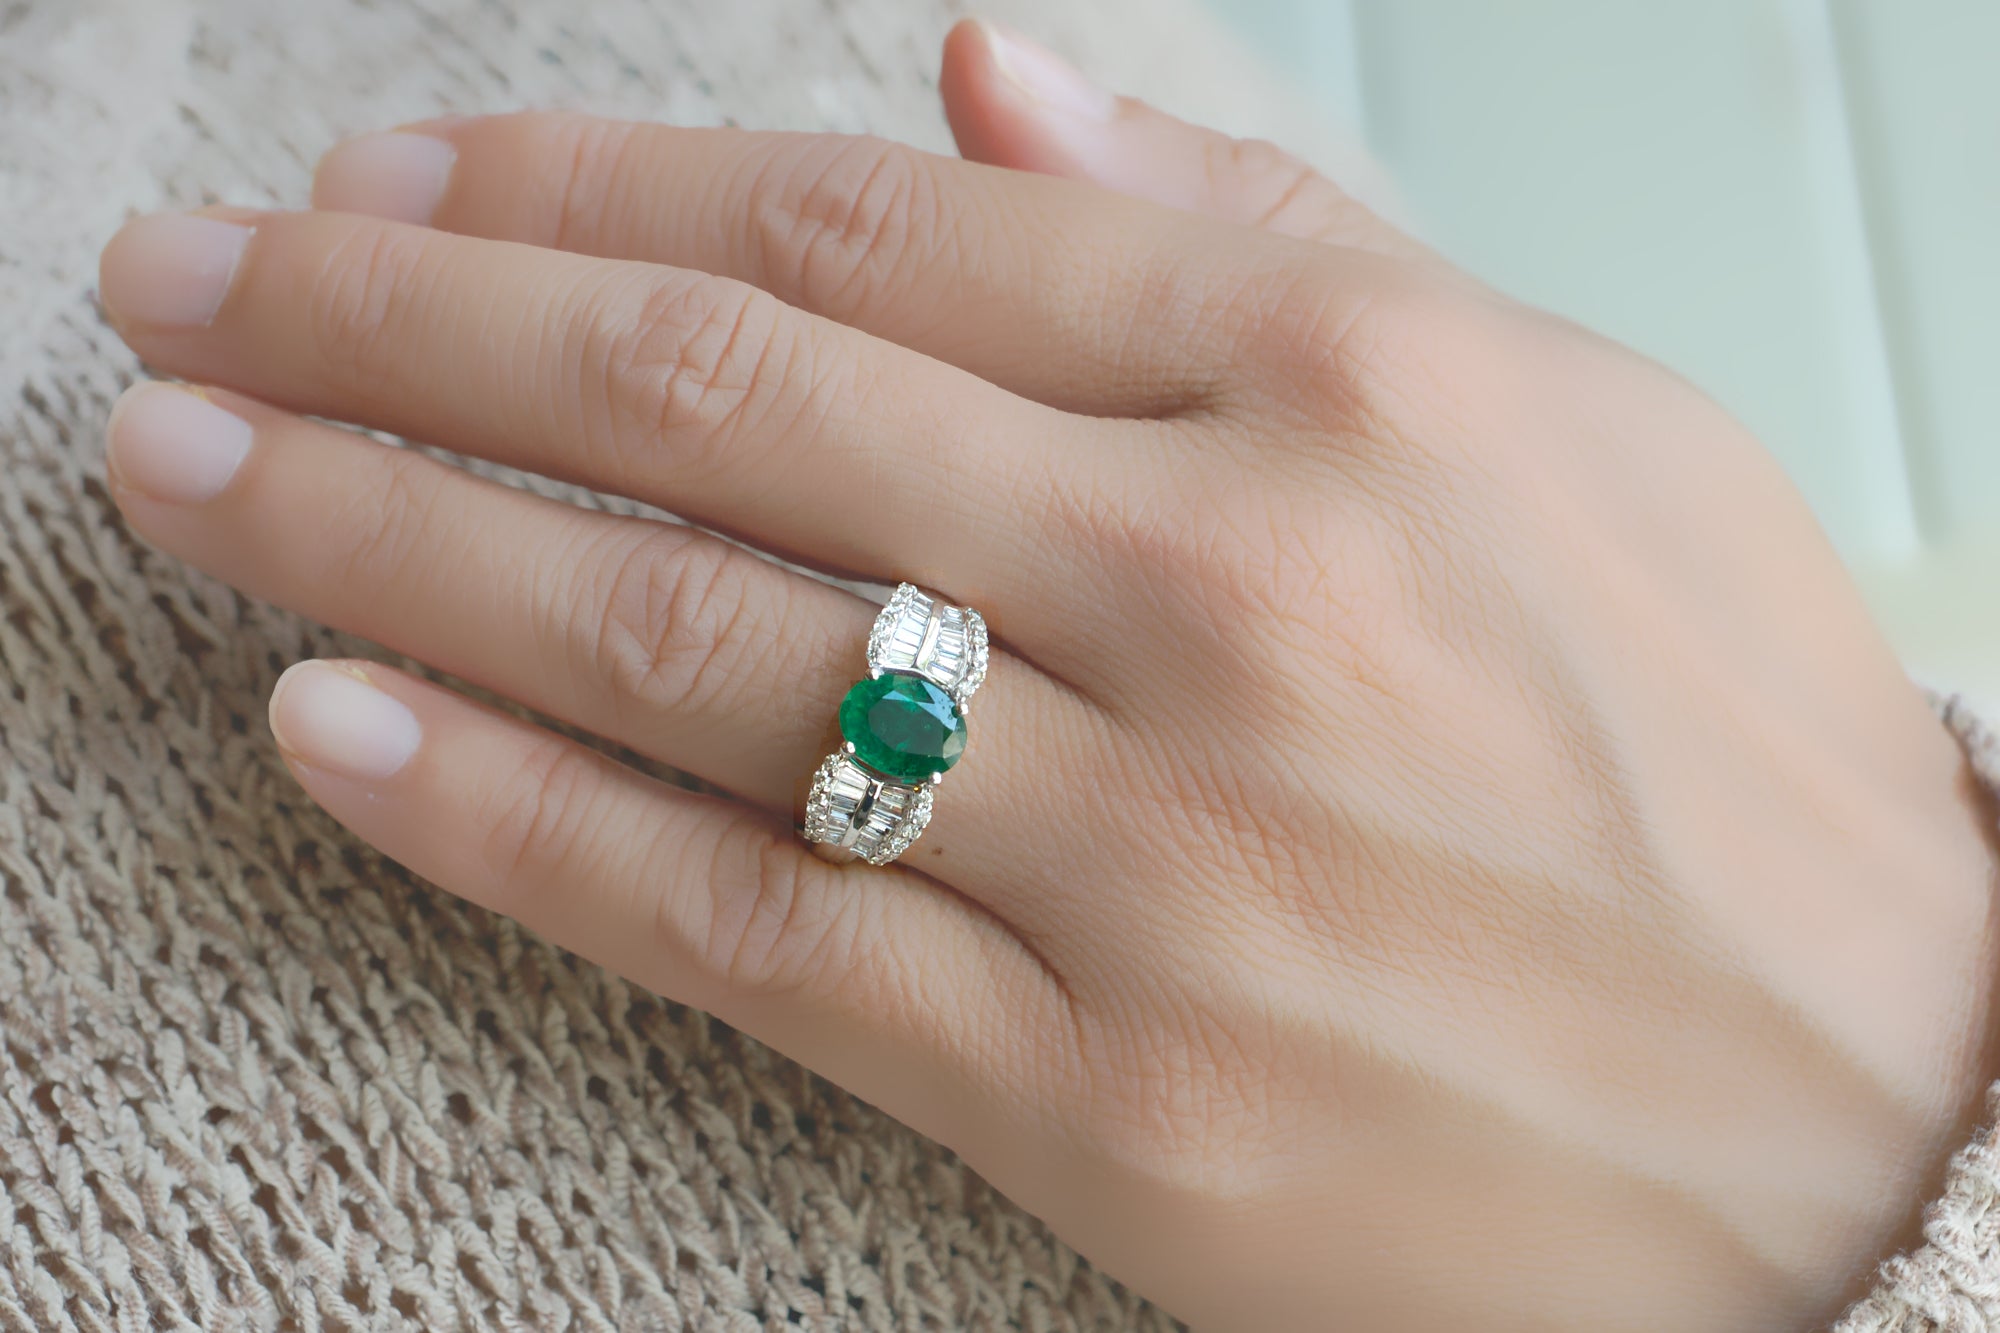 The Estelle Oval Emerald Ring (2.15ct. tw.)